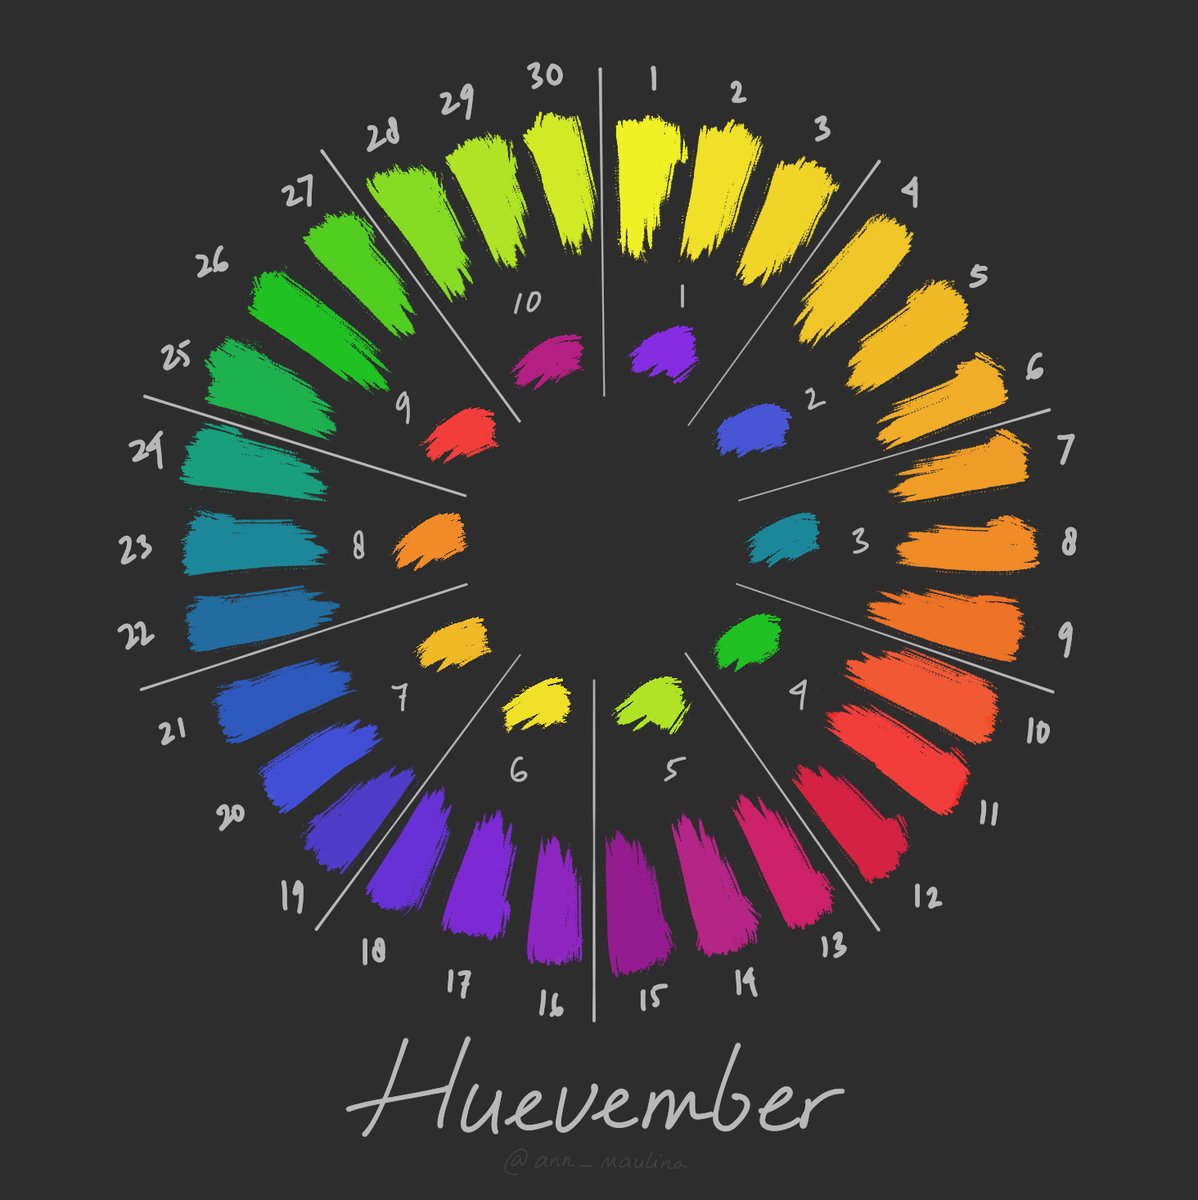 「The color prompts that I'll use for #hue」|Ann 🌿のイラスト